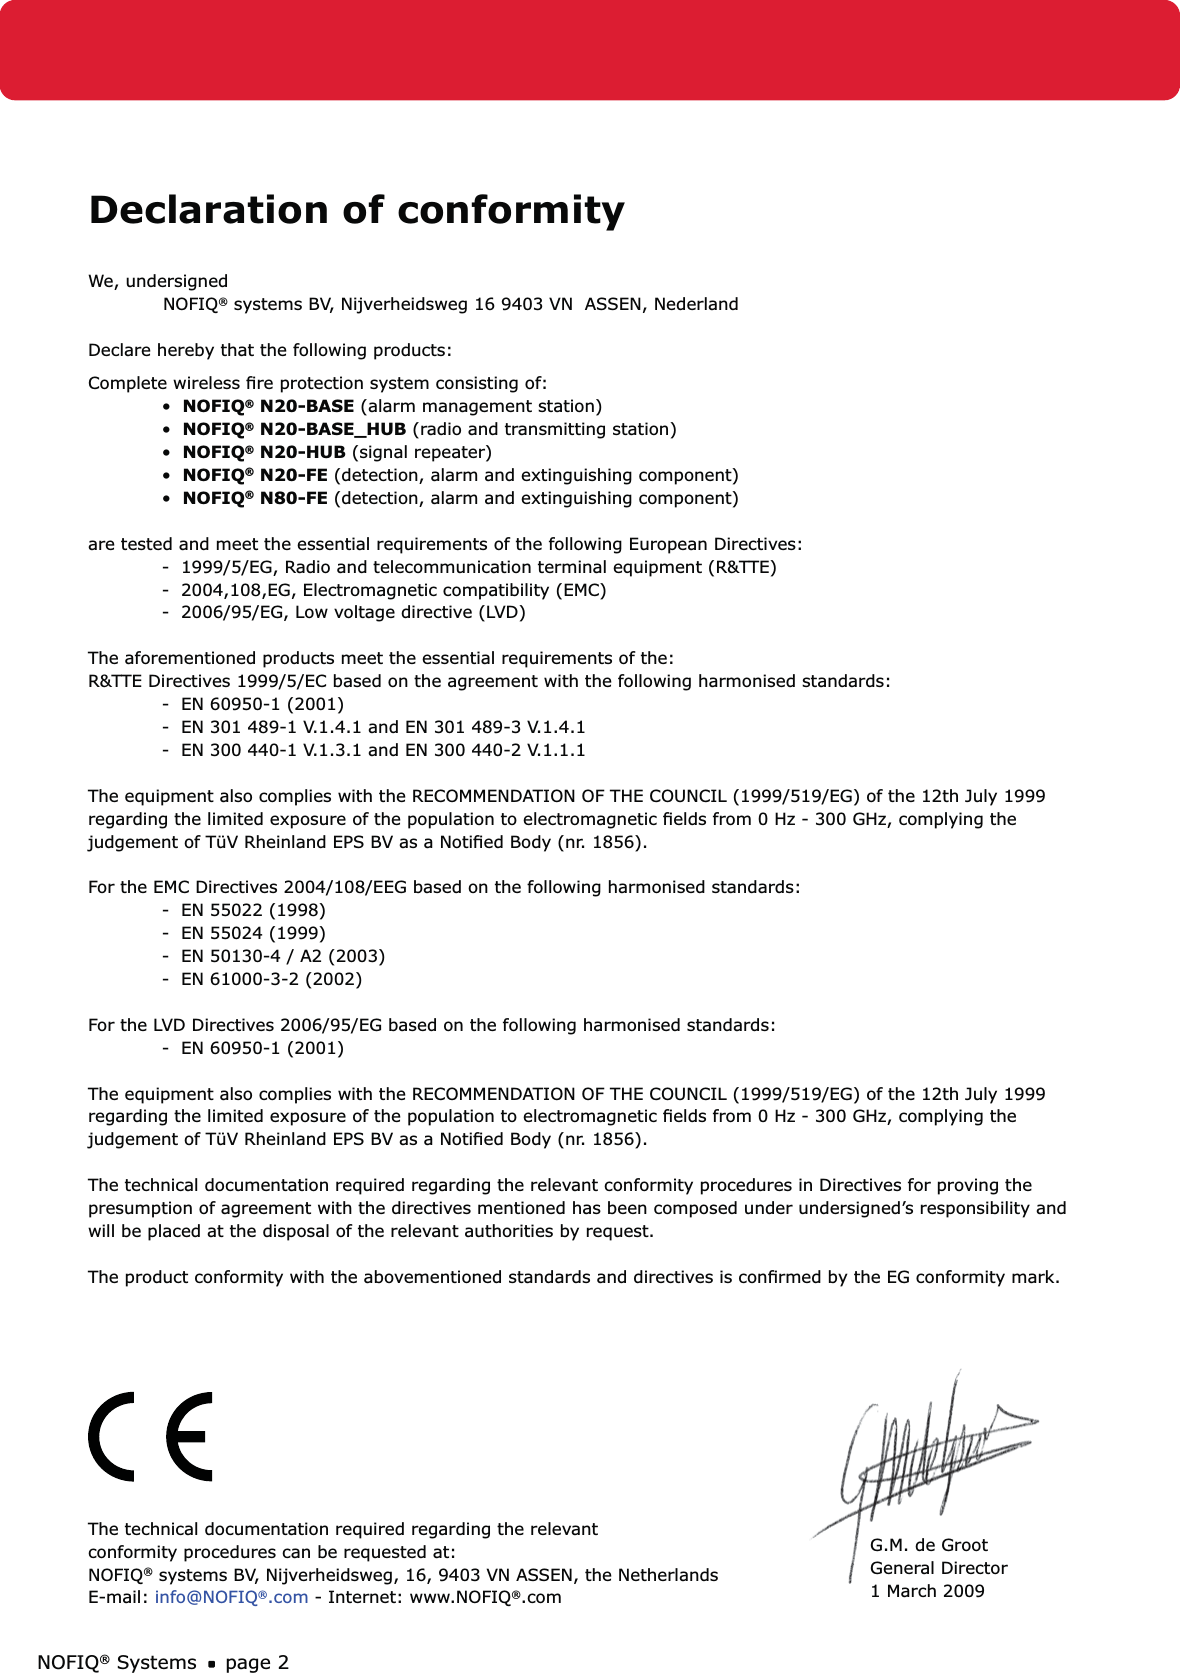 NOFIQ® Systems page 2Declaration of conformityWe, undersigned NOFIQ® systems BV, Nijverheidsweg 16 9403 VN  ASSEN, NederlandDeclare hereby that the following products:  Complete wireless ﬁre protection system consisting of:•  NOFIQ® N20-BASE (alarm management station)•  NOFIQ® N20-BASE_HUB (radio and transmitting station)•  NOFIQ® N20-HUB (signal repeater)•  NOFIQ® N20-FE (detection, alarm and extinguishing component)•  NOFIQ® N80-FE (detection, alarm and extinguishing component)are tested and meet the essential requirements of the following European Directives:-  1999/5/EG, Radio and telecommunication terminal equipment (R&amp;TTE)-  2004,108,EG, Electromagnetic compatibility (EMC)-  2006/95/EG, Low voltage directive (LVD)The aforementioned products meet the essential requirements of the:R&amp;TTE Directives 1999/5/EC based on the agreement with the following harmonised standards:-  EN 60950-1 (2001)-  EN 301 489-1 V.1.4.1 and EN 301 489-3 V.1.4.1-  EN 300 440-1 V.1.3.1 and EN 300 440-2 V.1.1.1The equipment also complies with the RECOMMENDATION OF THE COUNCIL (1999/519/EG) of the 12th July 1999regarding the limited exposure of the population to electromagnetic ﬁelds from 0 Hz - 300 GHz, complying the judgement of TüV Rheinland EPS BV as a Notiﬁed Body (nr. 1856).For the EMC Directives 2004/108/EEG based on the following harmonised standards:-  EN 55022 (1998)-  EN 55024 (1999)-  EN 50130-4 / A2 (2003)-  EN 61000-3-2 (2002)For the LVD Directives 2006/95/EG based on the following harmonised standards:-  EN 60950-1 (2001)The equipment also complies with the RECOMMENDATION OF THE COUNCIL (1999/519/EG) of the 12th July 1999regarding the limited exposure of the population to electromagnetic ﬁelds from 0 Hz - 300 GHz, complying the judgement of TüV Rheinland EPS BV as a Notiﬁed Body (nr. 1856).The technical documentation required regarding the relevant conformity procedures in Directives for proving thepresumption of agreement with the directives mentioned has been composed under undersigned’s responsibility andwill be placed at the disposal of the relevant authorities by request.The product conformity with the abovementioned standards and directives is conﬁrmed by the EG conformity mark.The technical documentation required regarding the relevant conformity procedures can be requested at:NOFIQ® systems BV, Nijverheidsweg, 16, 9403 VN ASSEN, the Netherlands  E-mail: info@NOFIQ®.com - Internet: www.NOFIQ®.comG.M. de GrootGeneral Director1 March 2009